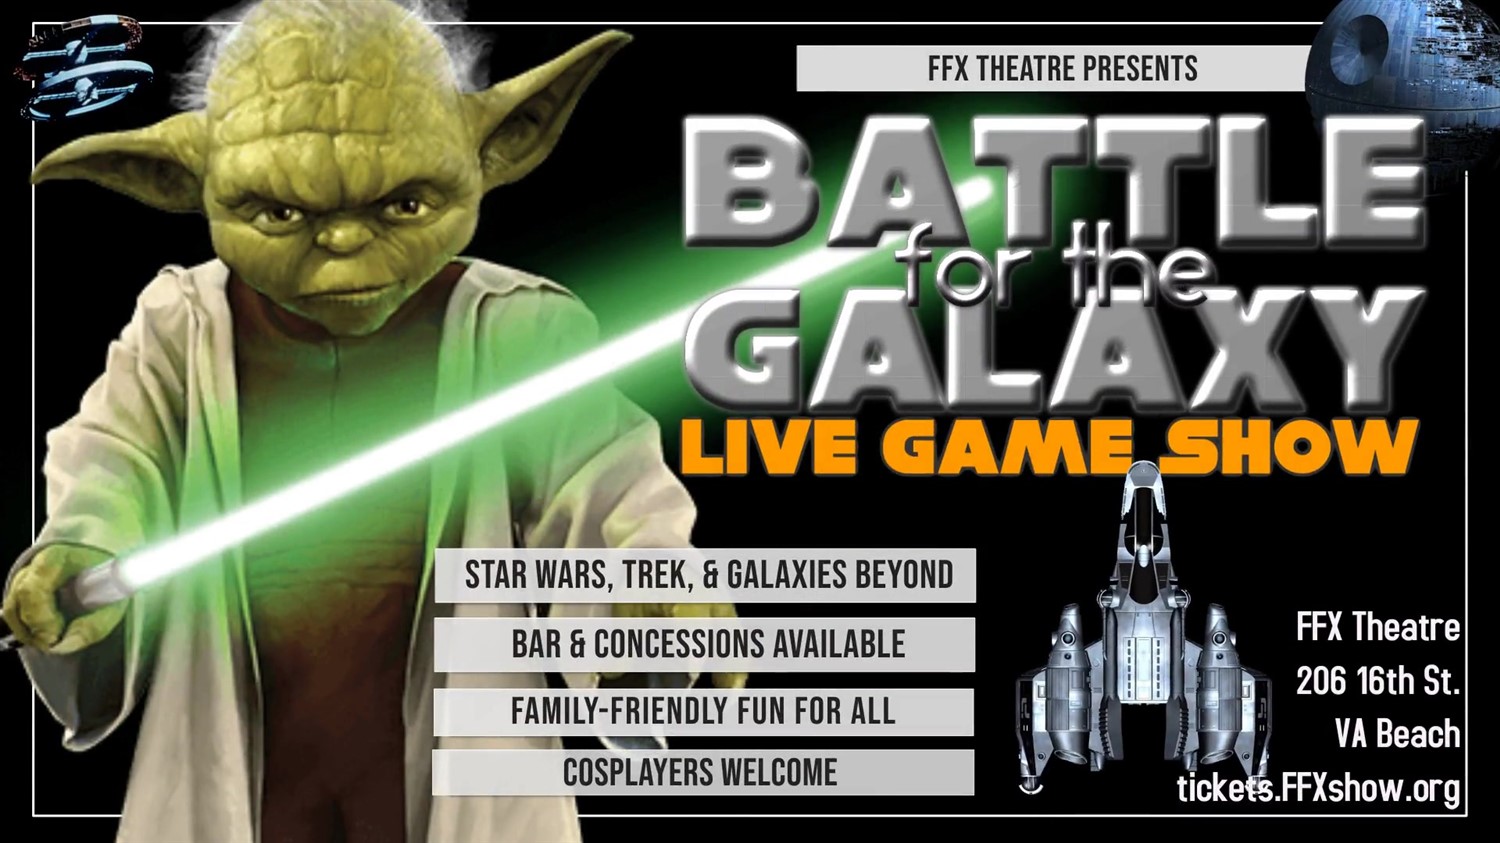 Battle for the Galaxy: Live Game Show Sci-Fun Fun! on Jun 04, 19:00@FFX Theatre - Pick a seat, Buy tickets and Get information on Family Fun Xperience tickets.ffxshow.org